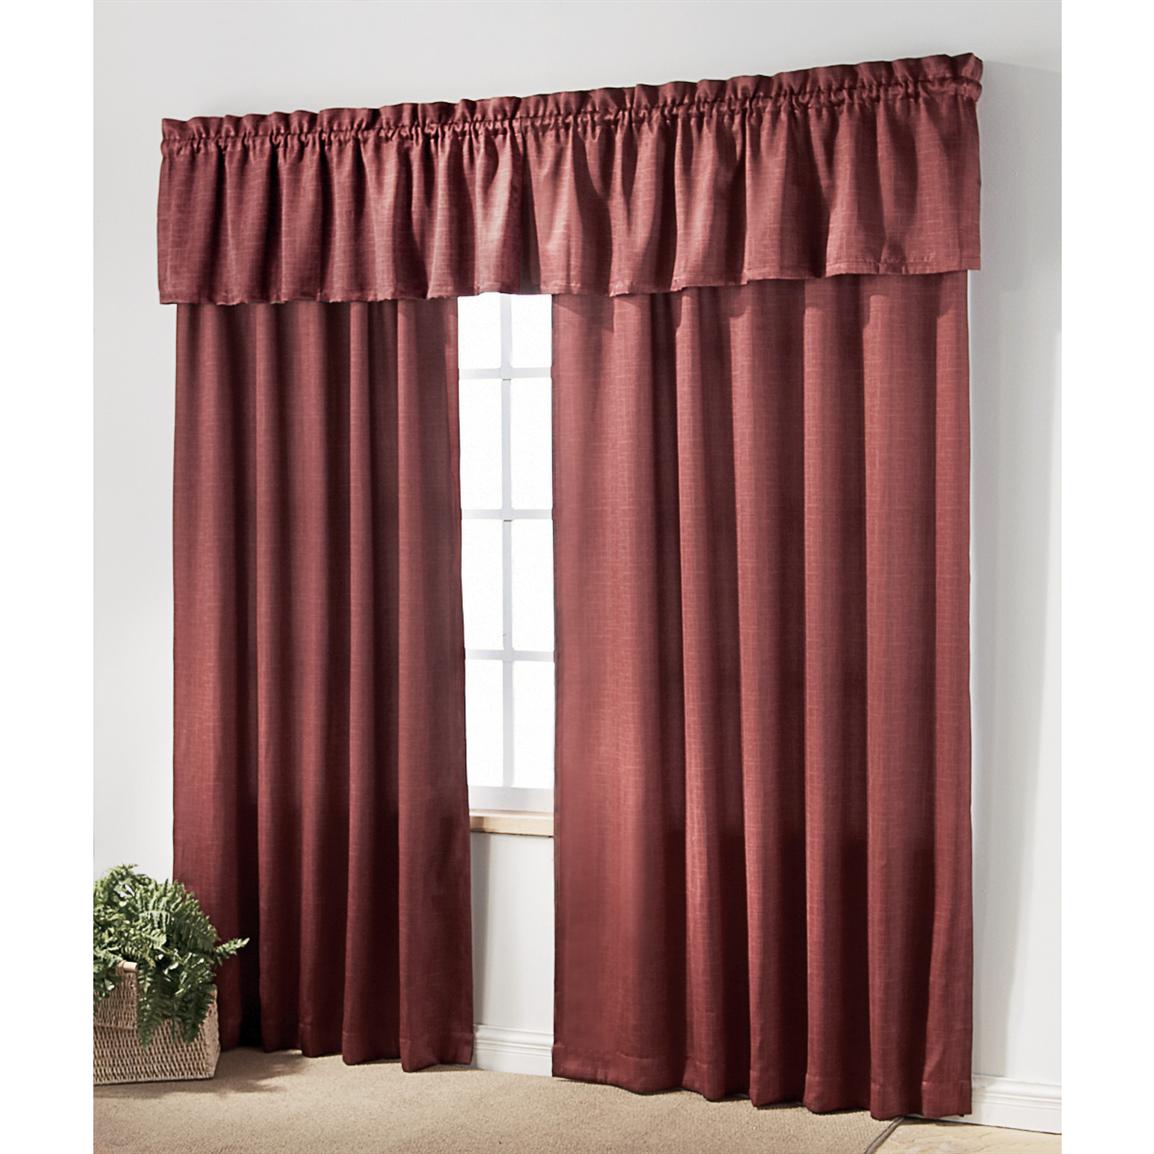 Pair of Black-out Curtains - 104417, Curtains at Sportsman's Guide